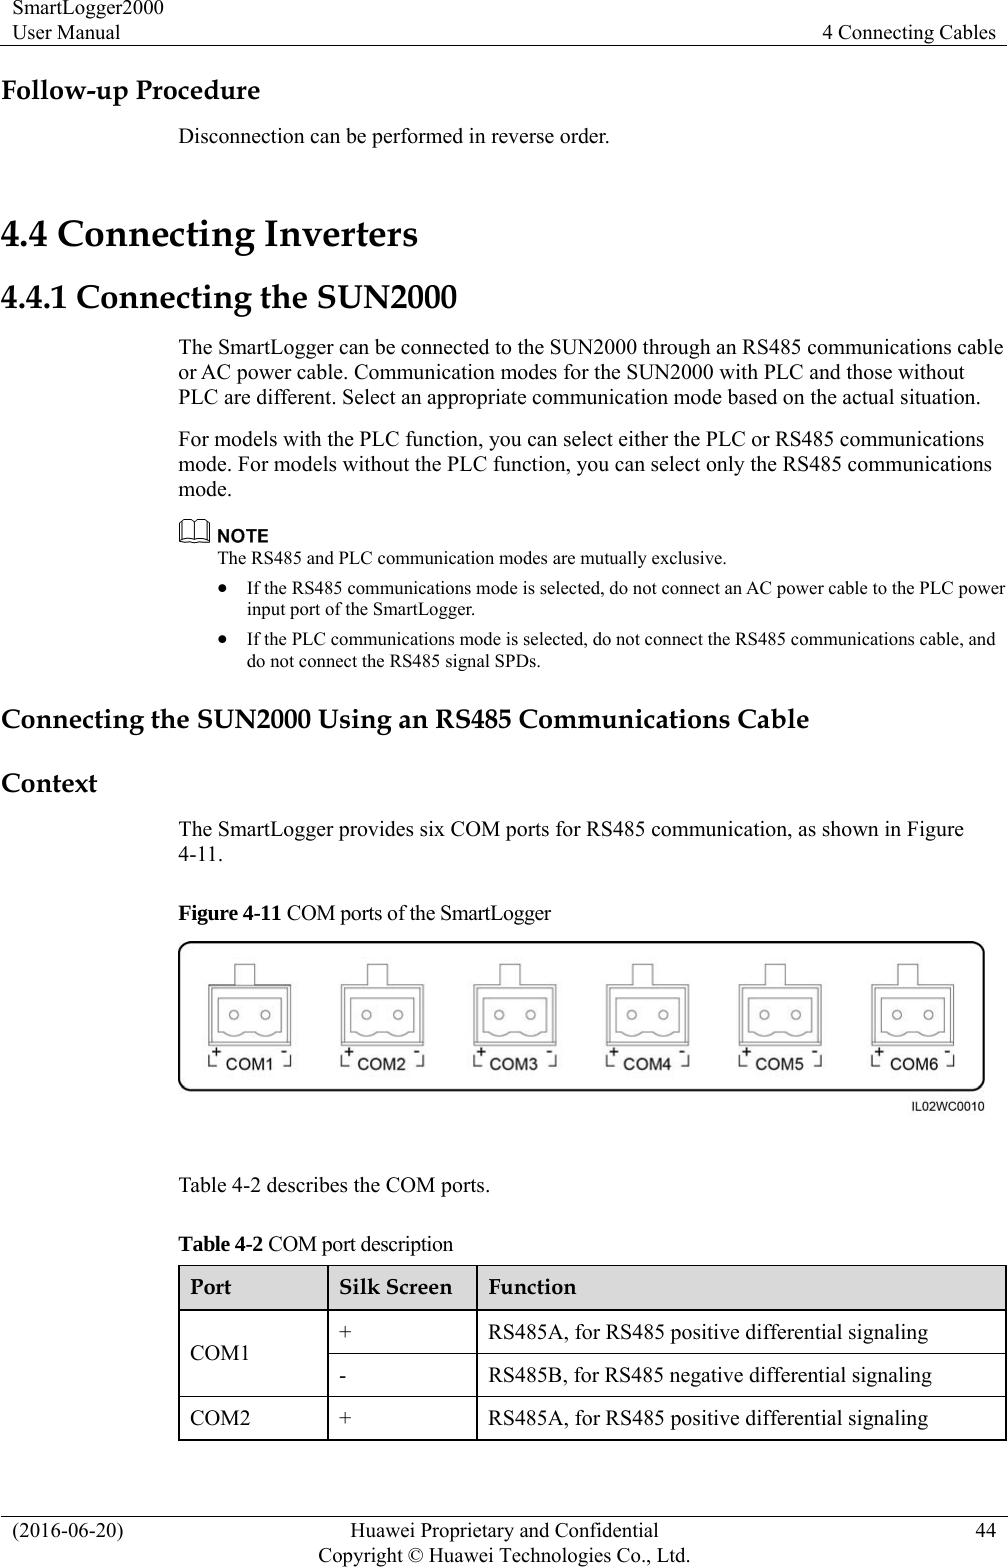 SmartLogger2000 User Manual  4 Connecting Cables (2016-06-20)  Huawei Proprietary and Confidential         Copyright © Huawei Technologies Co., Ltd.44 Follow-up Procedure Disconnection can be performed in reverse order. 4.4 Connecting Inverters 4.4.1 Connecting the SUN2000 The SmartLogger can be connected to the SUN2000 through an RS485 communications cable or AC power cable. Communication modes for the SUN2000 with PLC and those without PLC are different. Select an appropriate communication mode based on the actual situation.   For models with the PLC function, you can select either the PLC or RS485 communications mode. For models without the PLC function, you can select only the RS485 communications mode.   The RS485 and PLC communication modes are mutually exclusive.    If the RS485 communications mode is selected, do not connect an AC power cable to the PLC power input port of the SmartLogger.    If the PLC communications mode is selected, do not connect the RS485 communications cable, and do not connect the RS485 signal SPDs. Connecting the SUN2000 Using an RS485 Communications Cable Context The SmartLogger provides six COM ports for RS485 communication, as shown in Figure 4-11. Figure 4-11 COM ports of the SmartLogger   Table 4-2 describes the COM ports. Table 4-2 COM port description Port  Silk Screen  Function COM1 +  RS485A, for RS485 positive differential signaling -  RS485B, for RS485 negative differential signaling COM2  +  RS485A, for RS485 positive differential signaling 